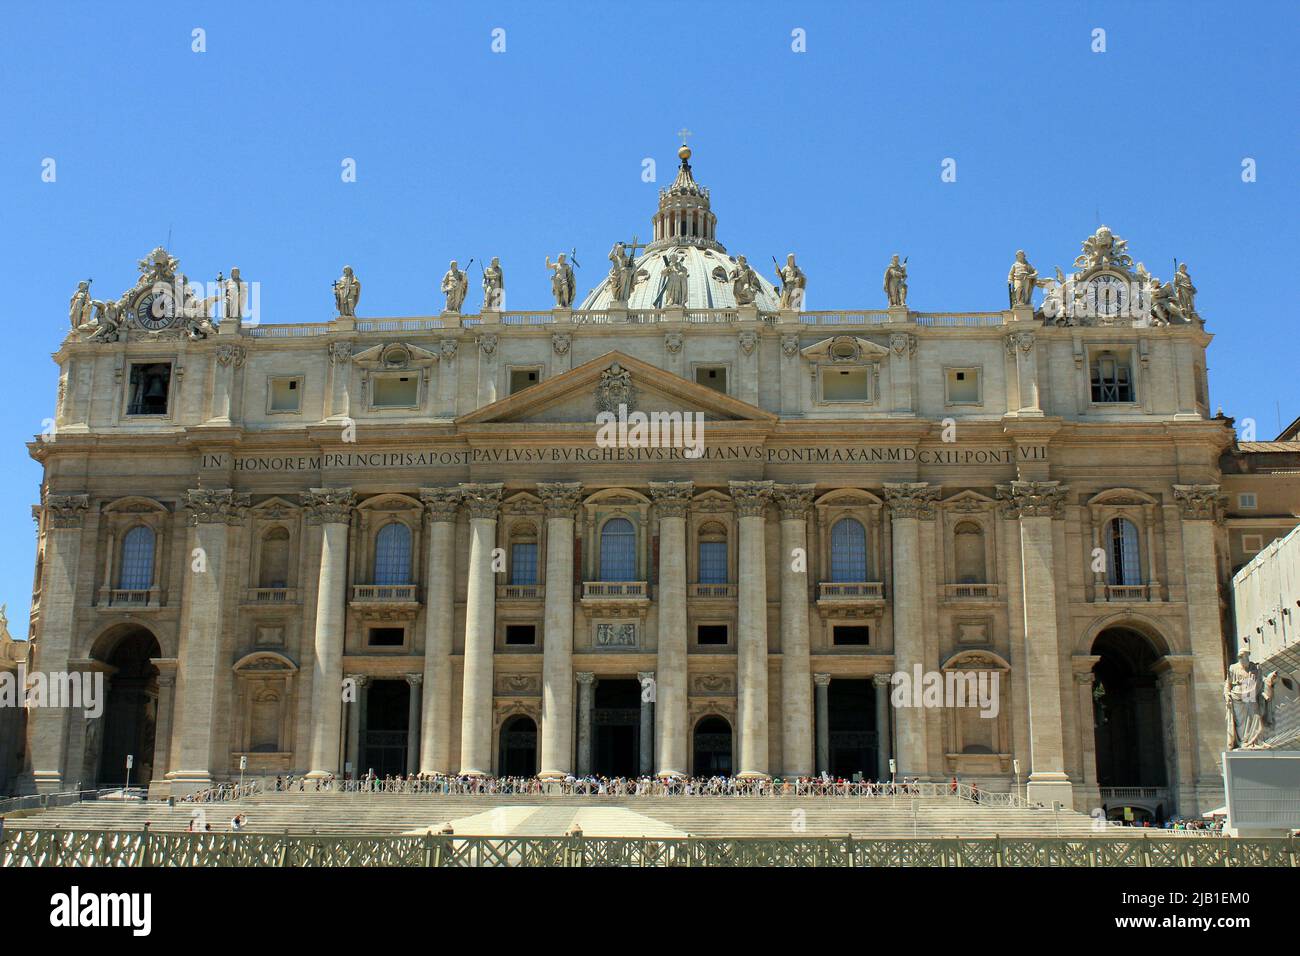 Photograph of St. Peters Basilic taken during a short visit to the Vatican City in Italy, although not with religious purpose was amazing to visit Stock Photo